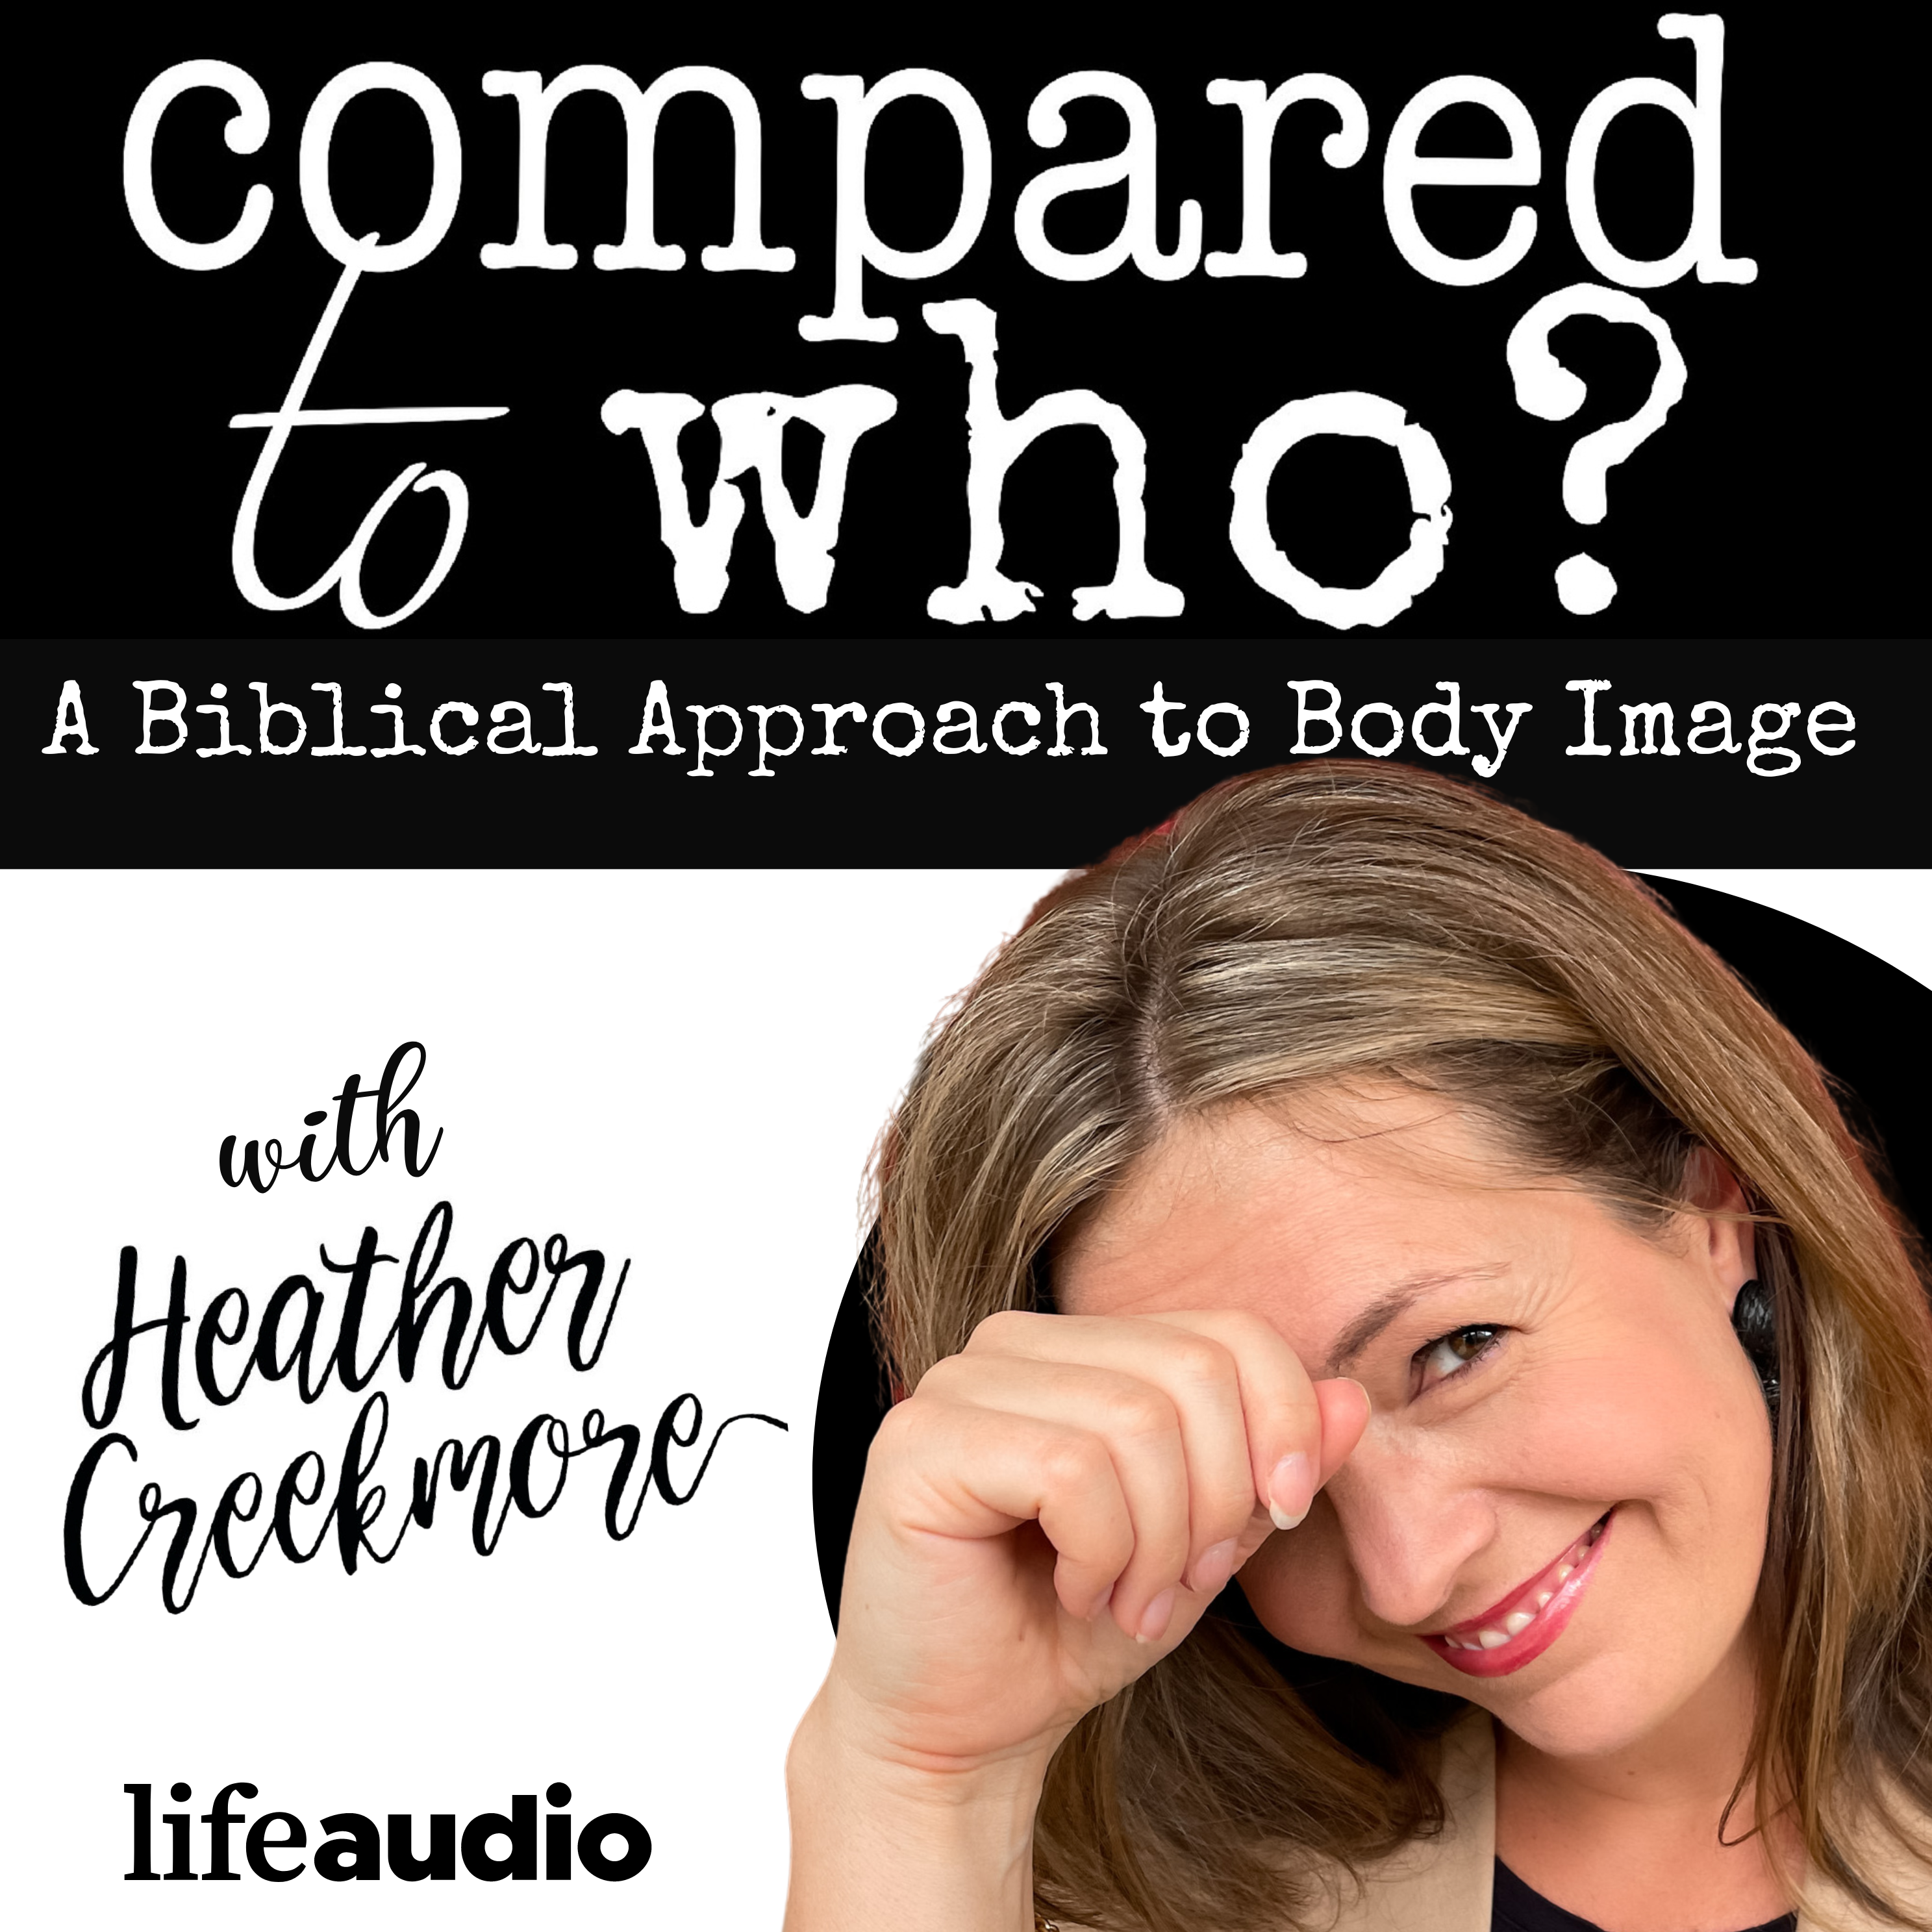 Self Control, Good Stewards, Body Image and Food Issues: LIVE Episode Featuring Amy Carlson